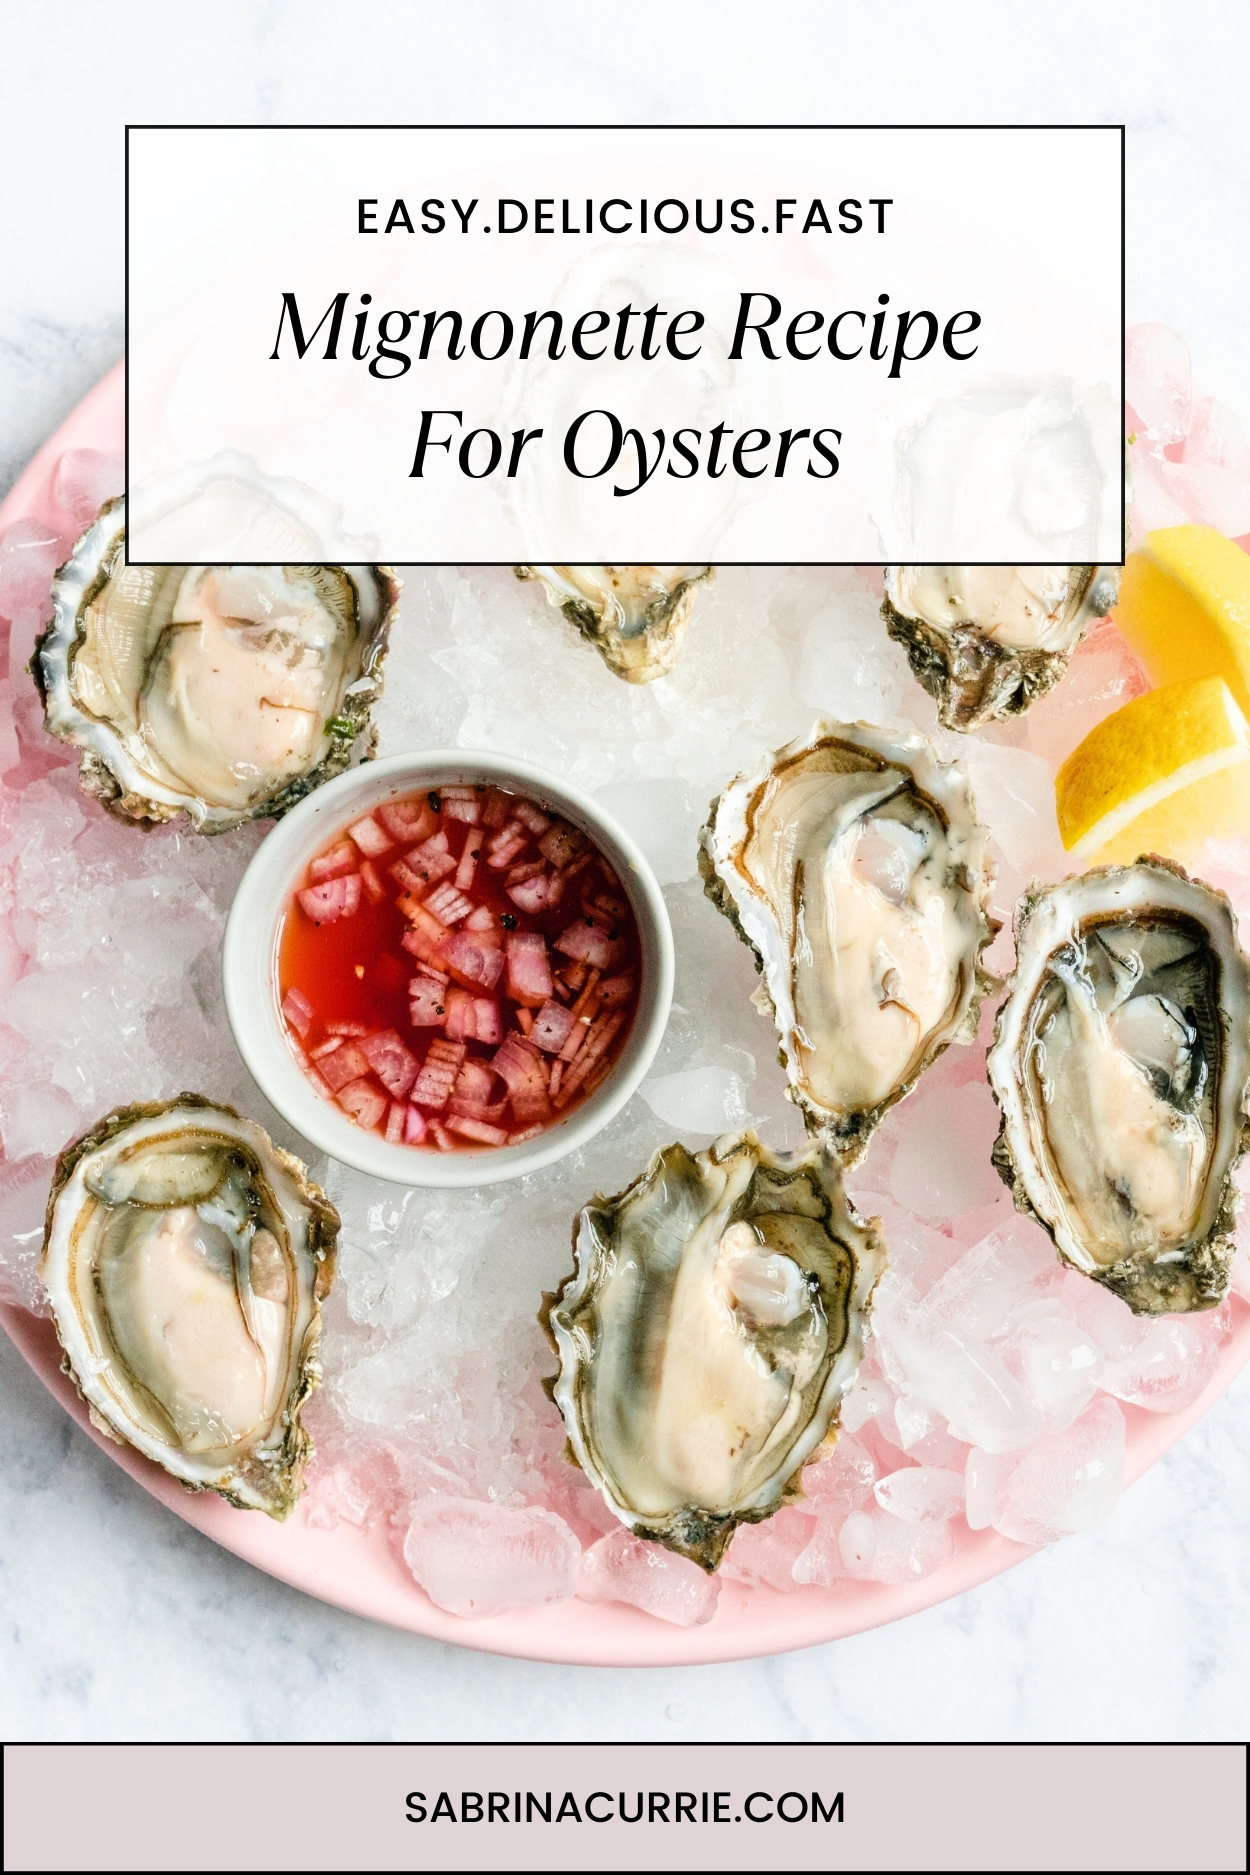 Tall Pinterest image with title over a photo of opened oysters on the half shell beside a dish of oyster vinaigrette and lemon wedge all on a pink plate.